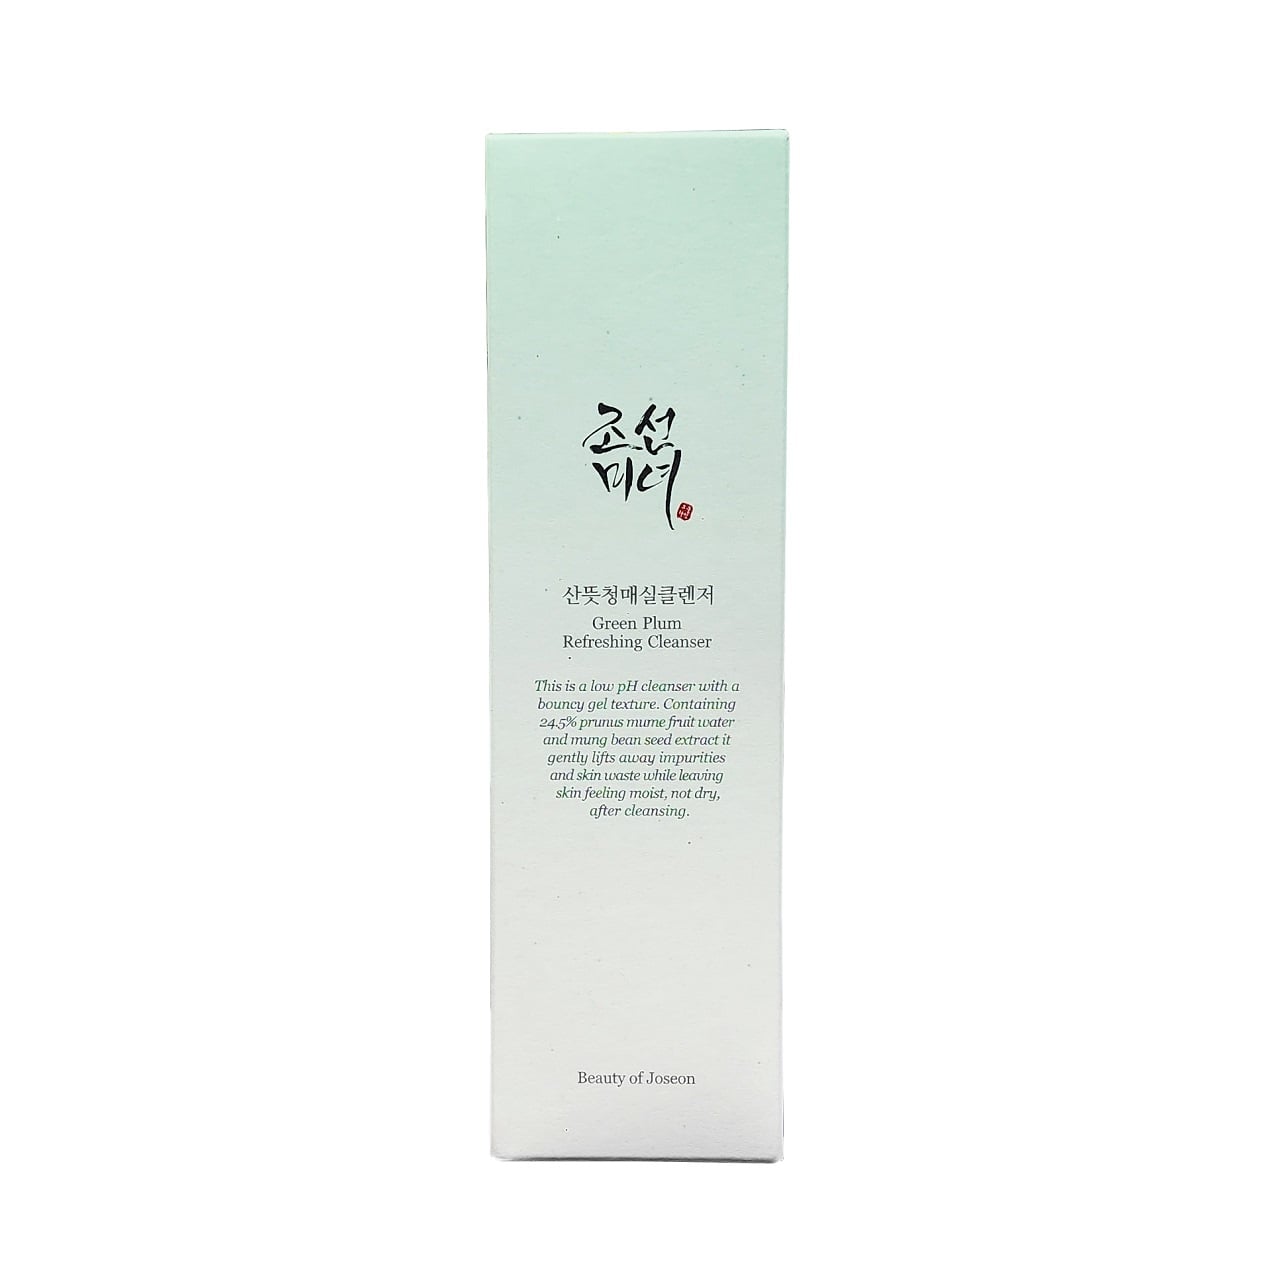 Product label for Beauty of Joseon Green Plum Refreshing Cleanser (100 mL)